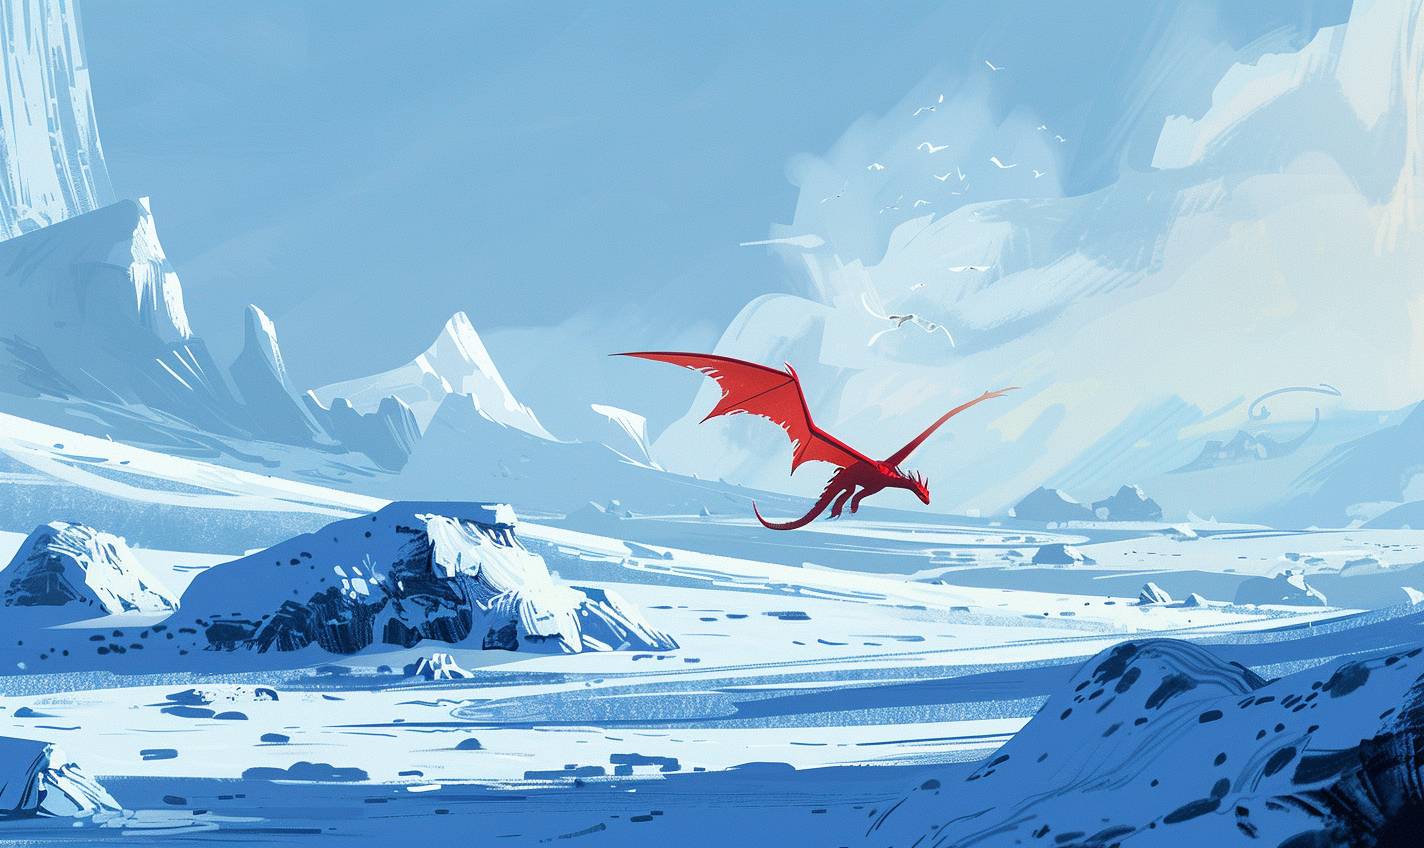 In the style of Jean Jullien, an ice dragon soaring over a frozen landscape